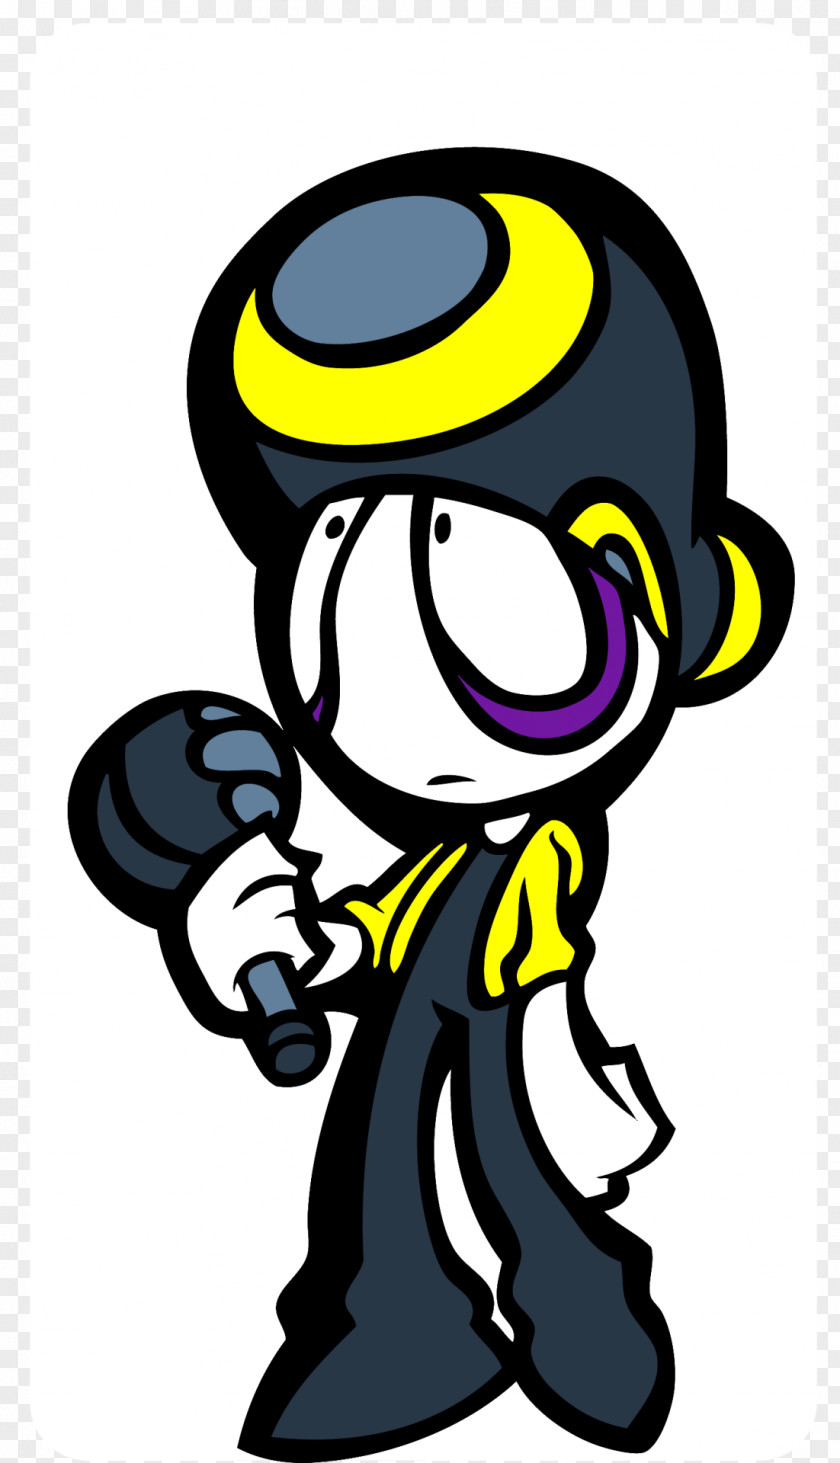 Pan Chicago-style Pizza Party RebelTaxi PNG